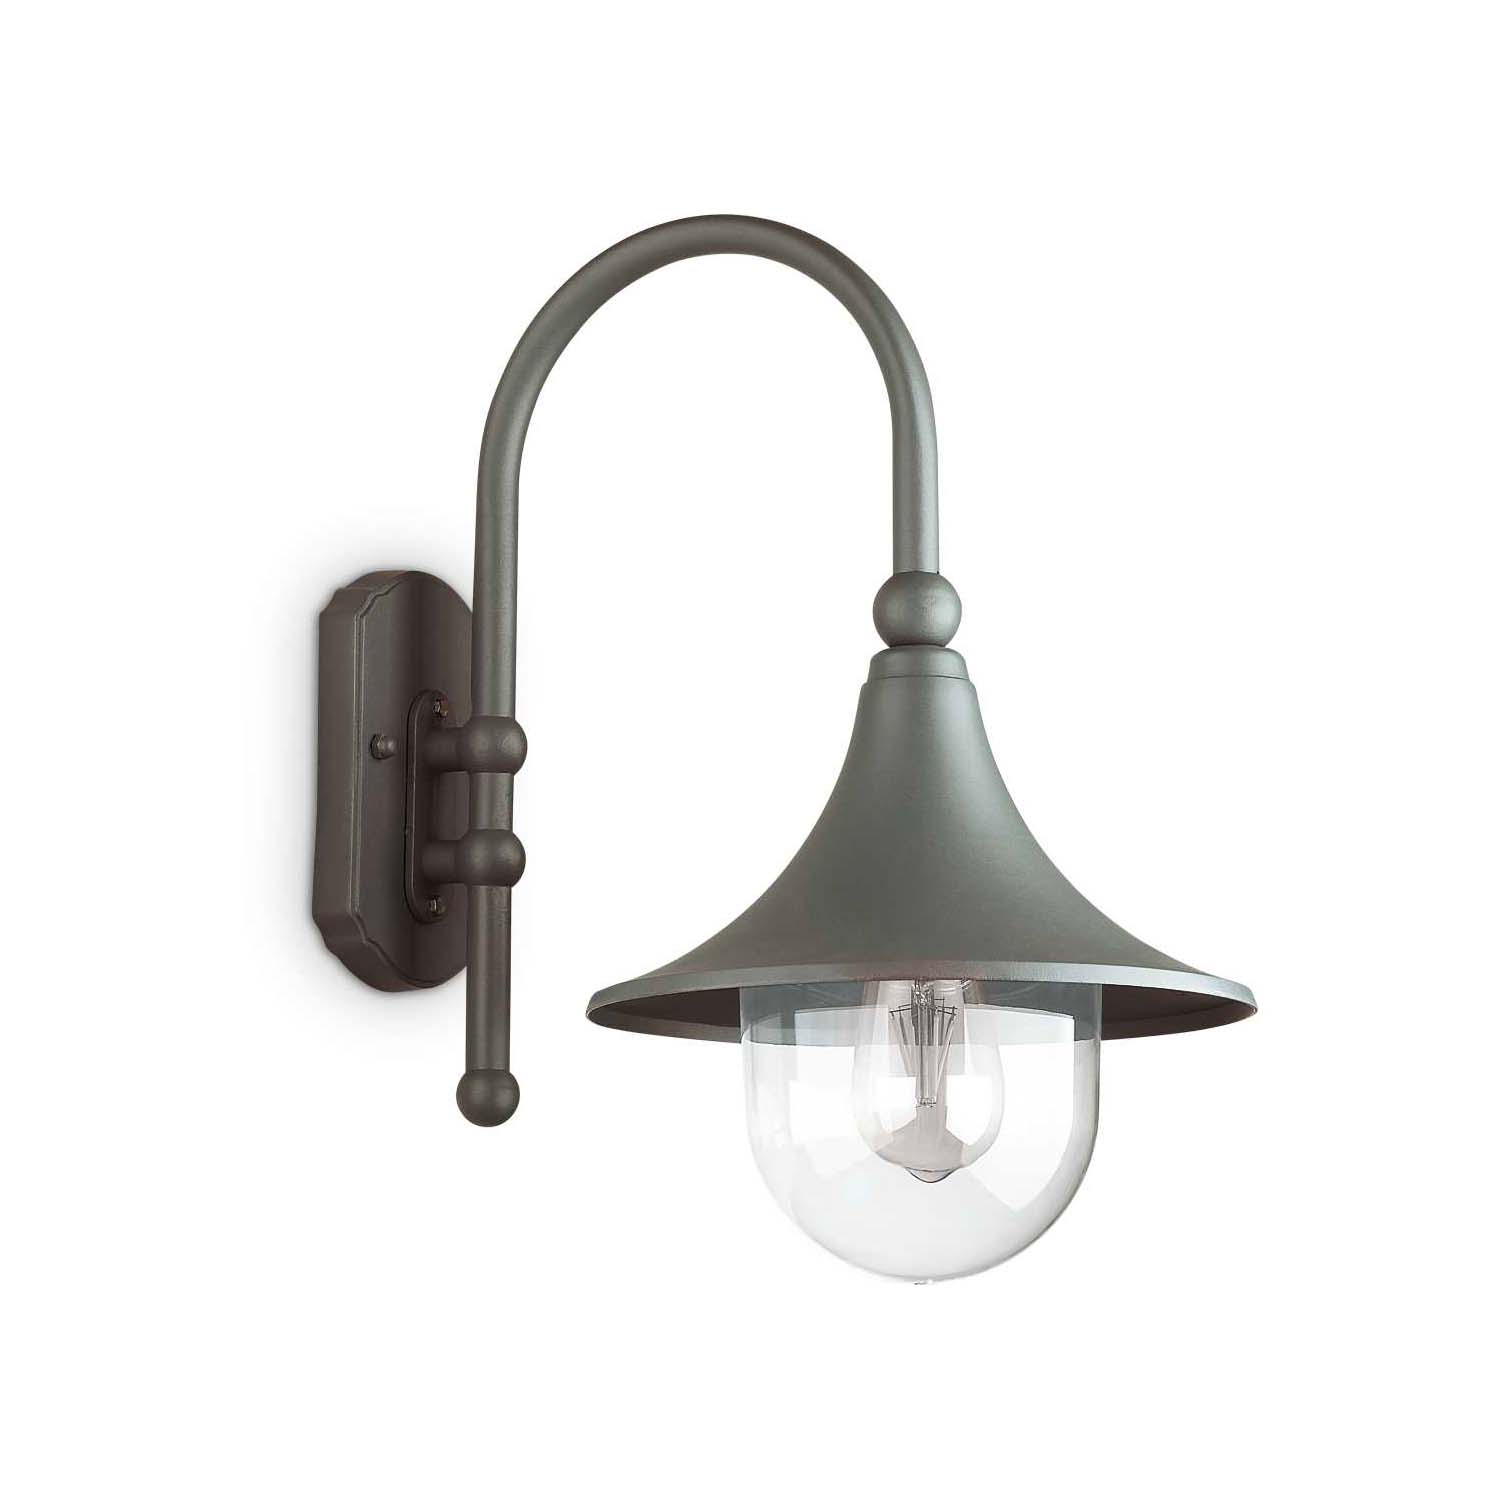 CIMA - Vintage gray or aged brass exterior wall light